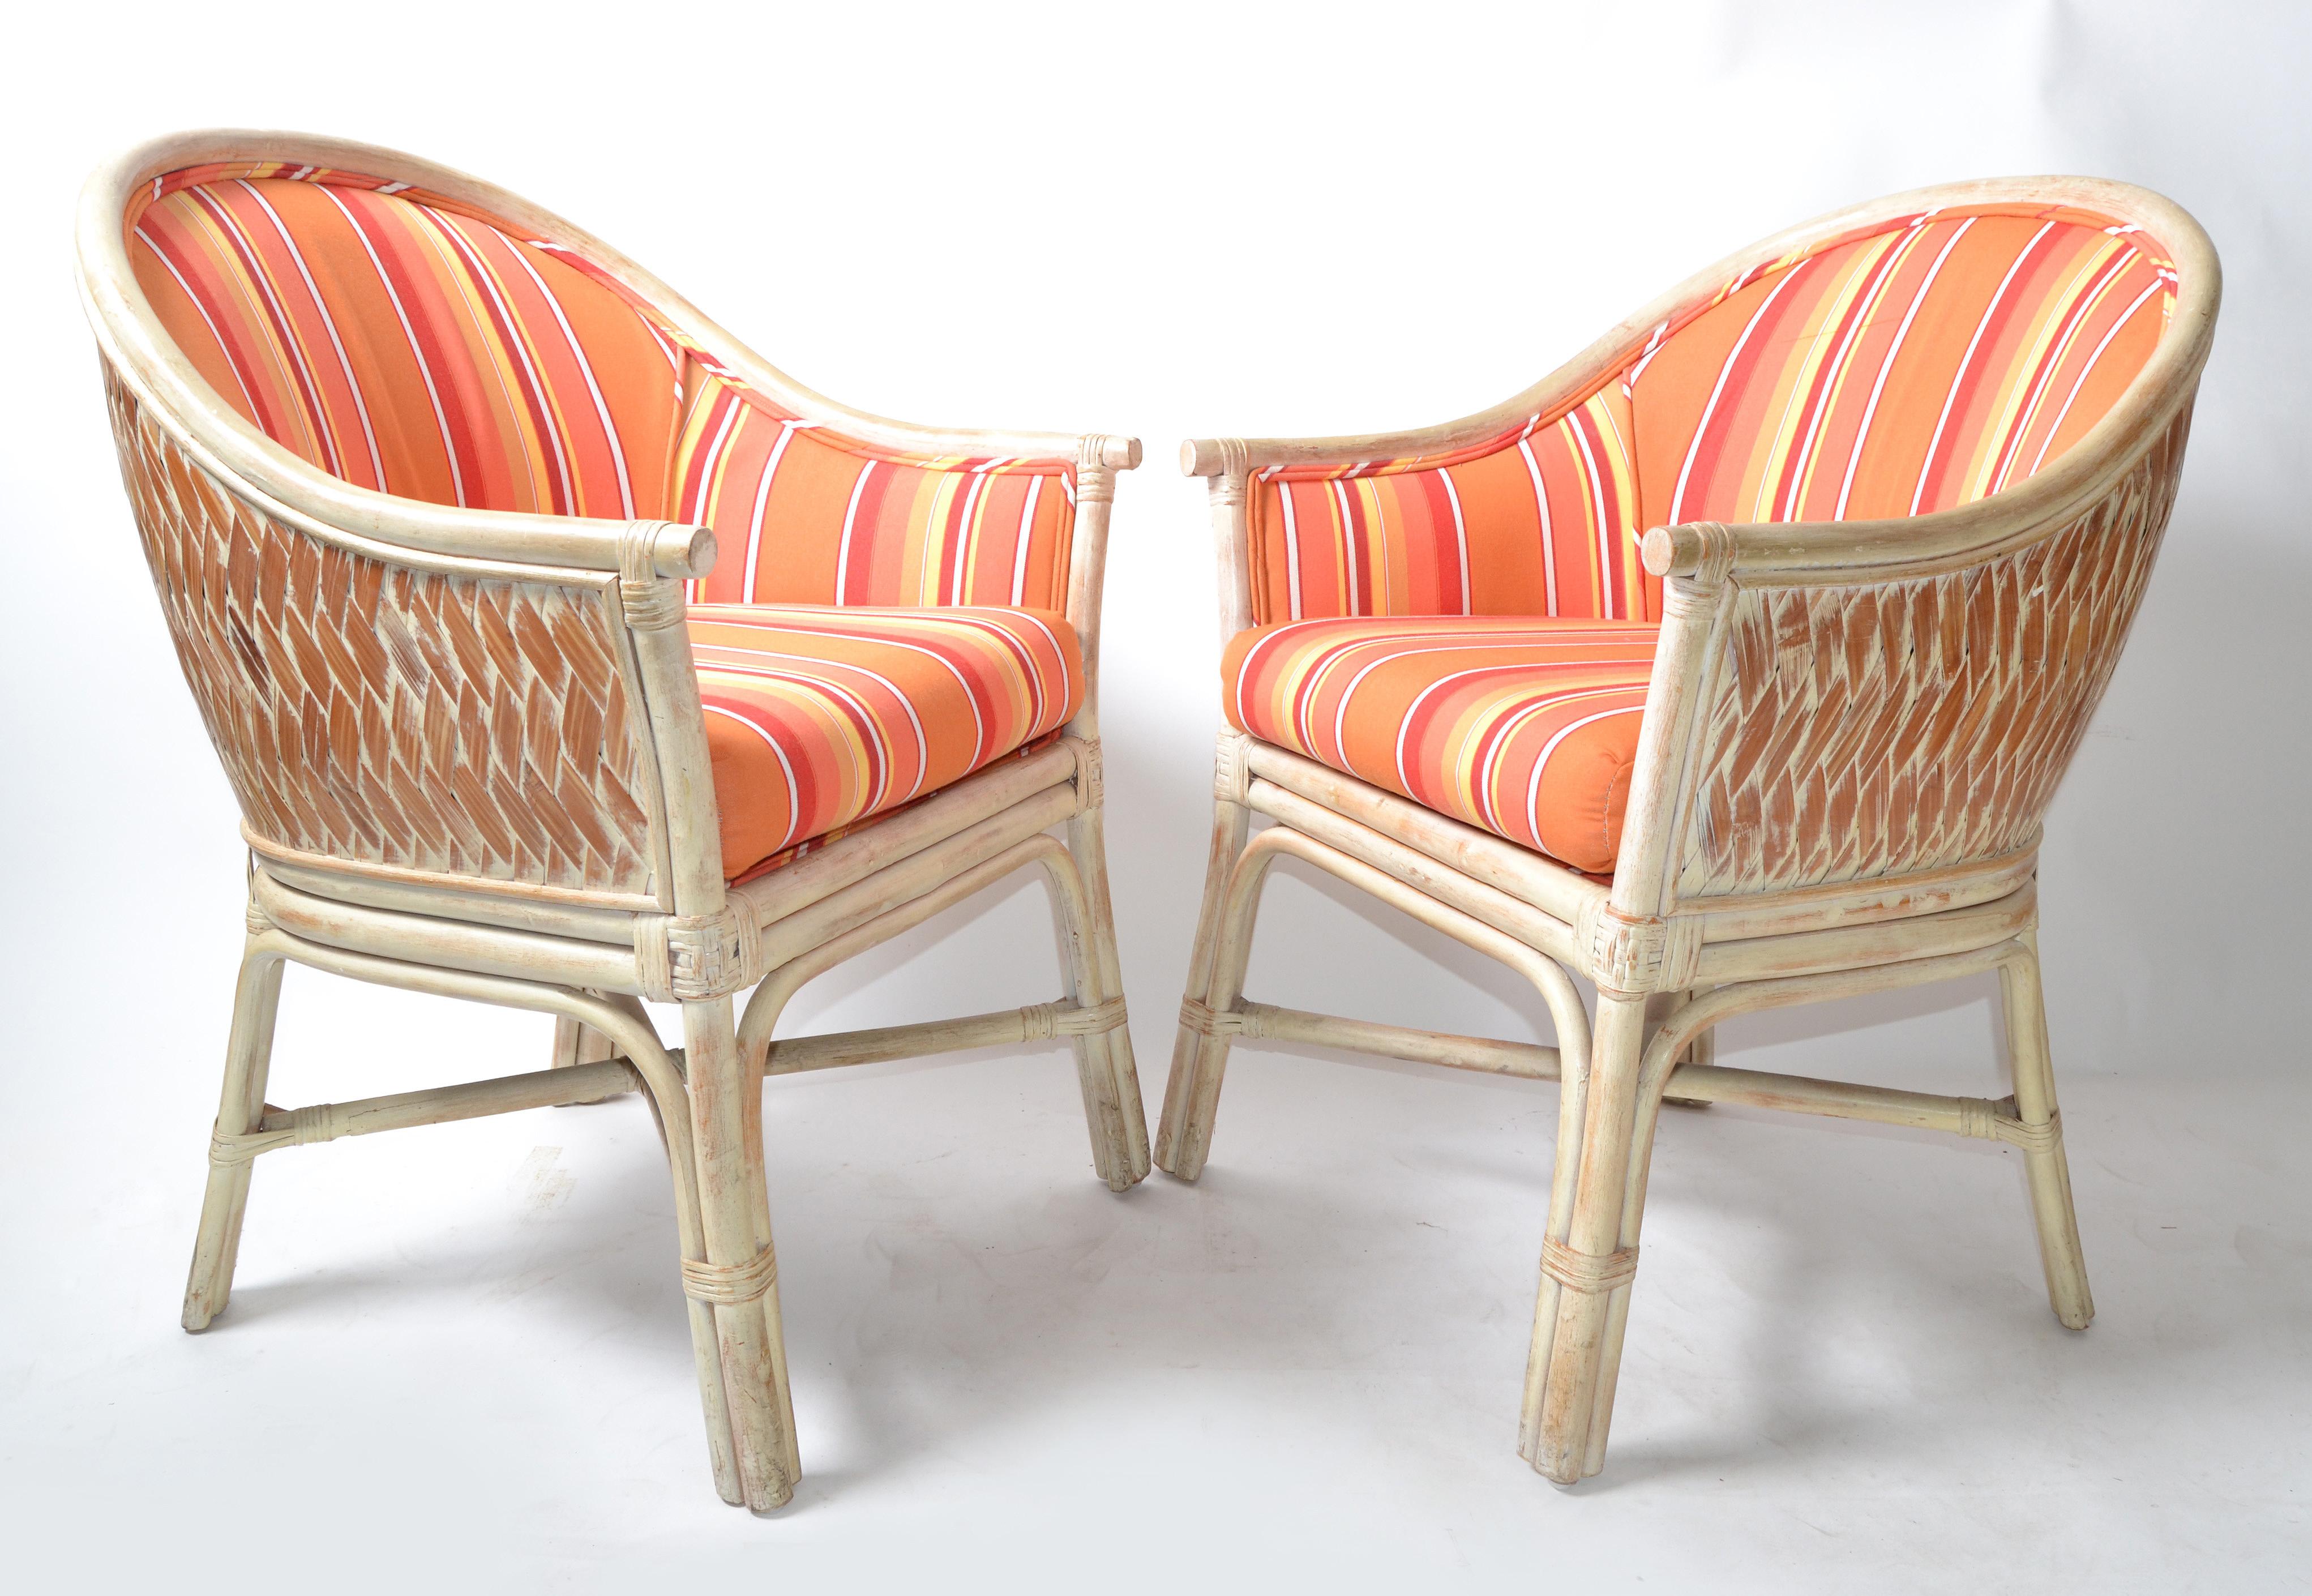 Pair, Mid-Century Modern Bamboo & Cane Armchair Orange Striped Upholstery, 1970 In Good Condition For Sale In Miami, FL